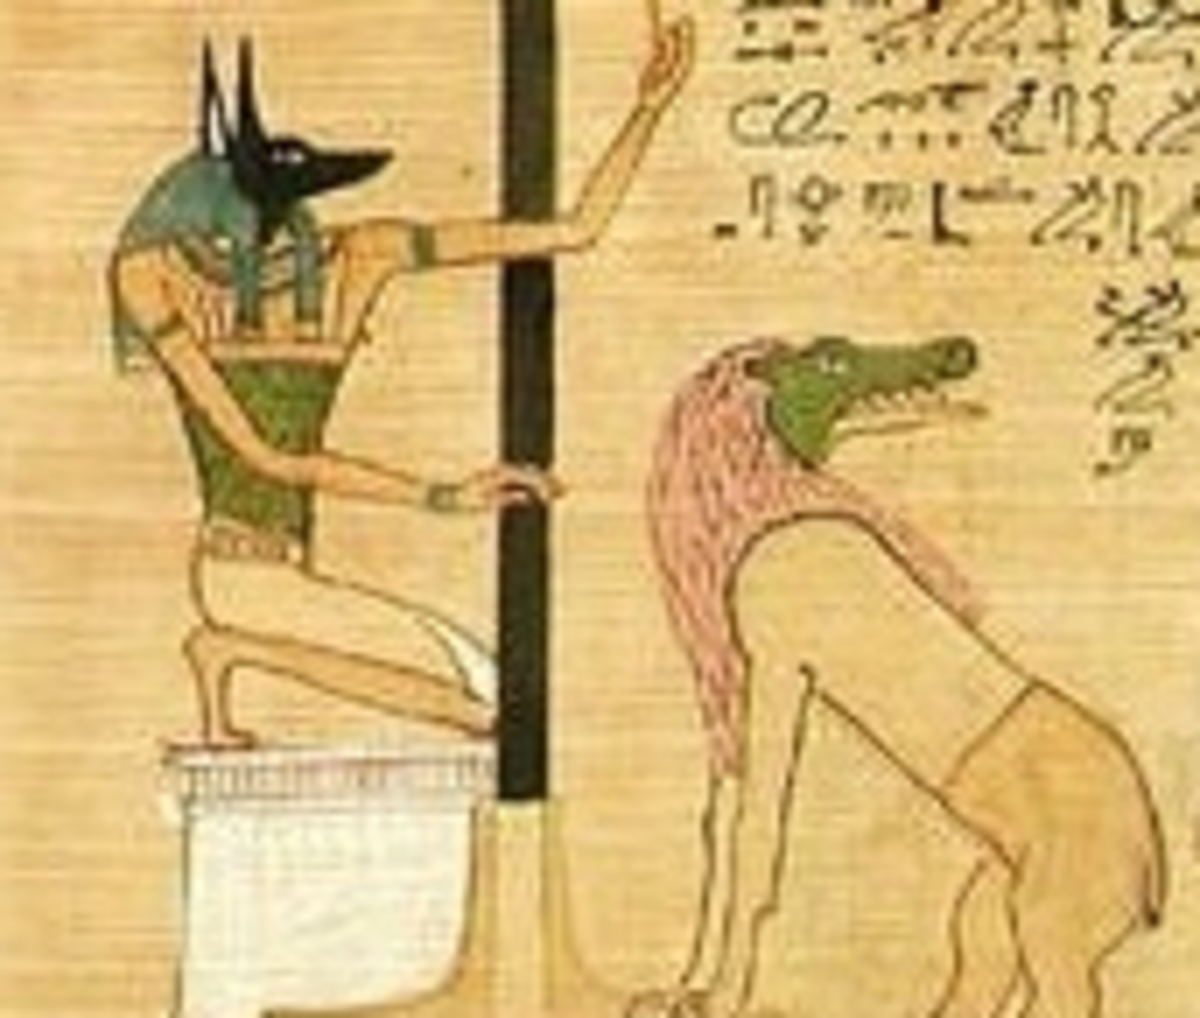 Anubis and Ammit